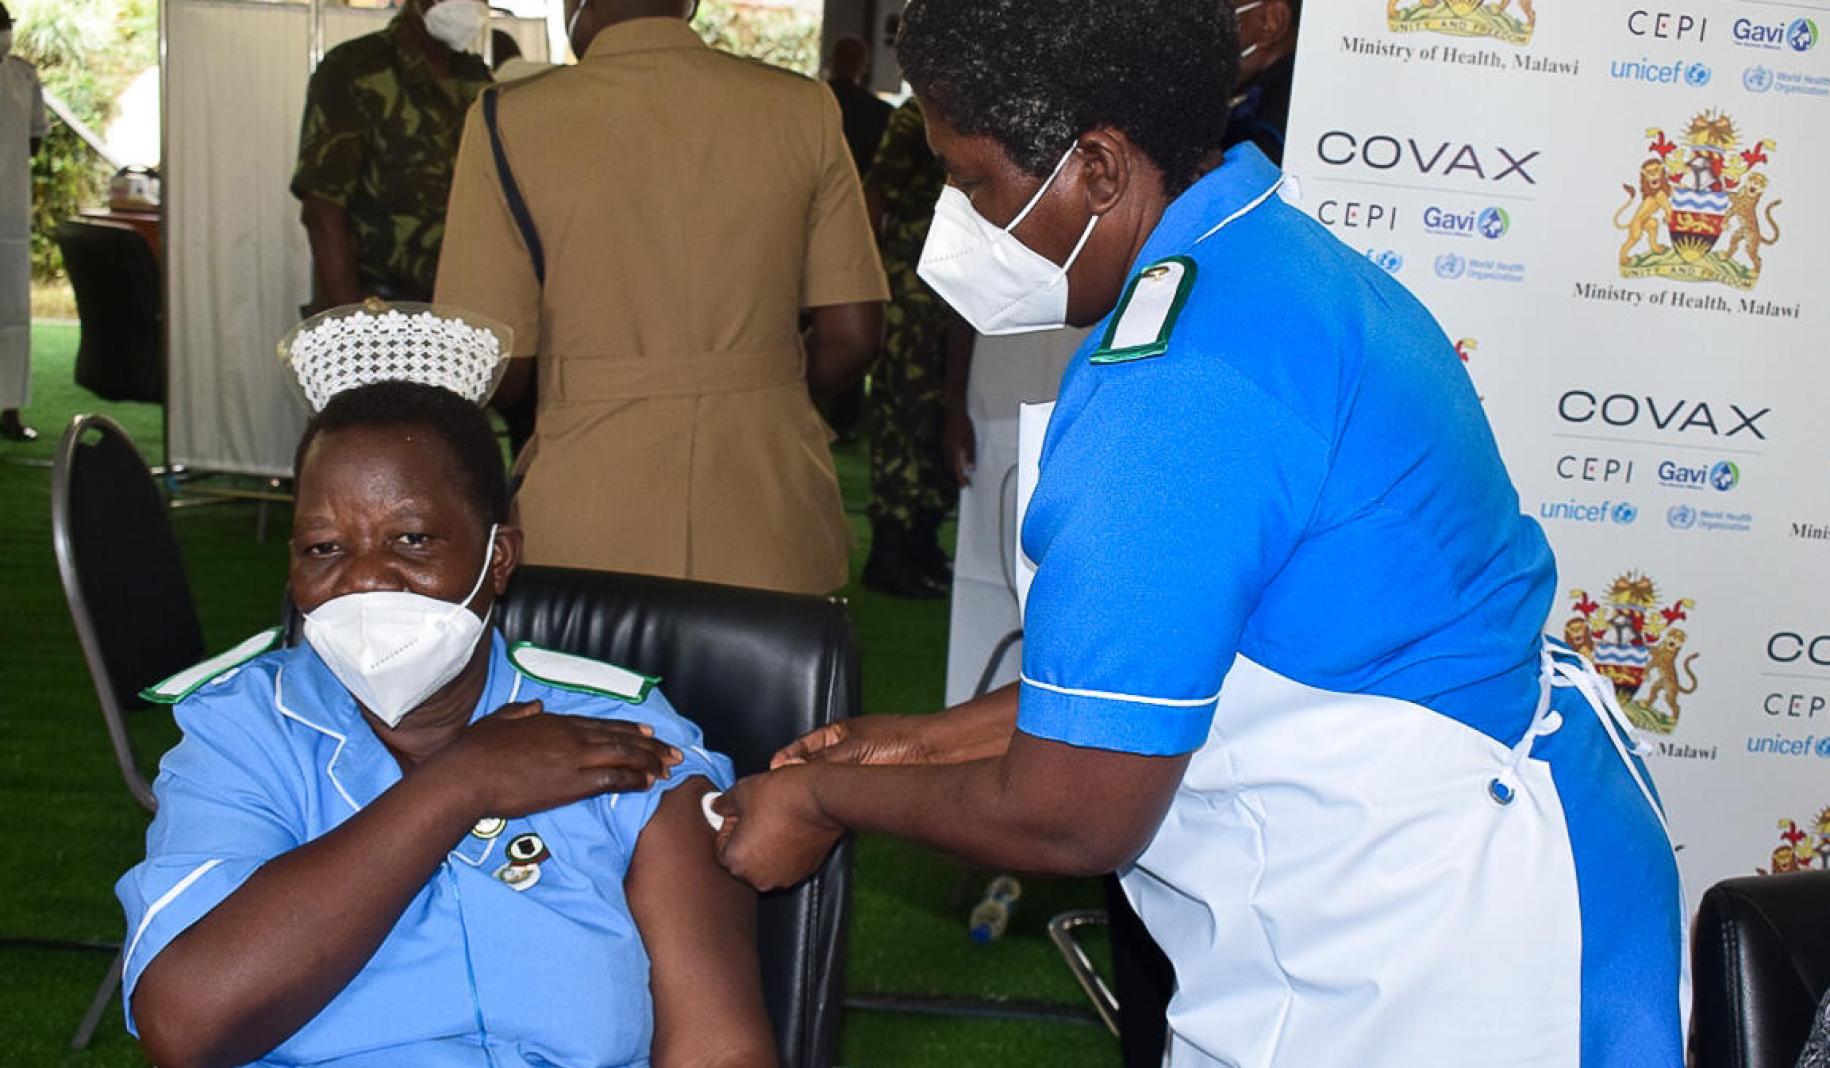 A healthcare professional at a vaccination site rolls up her sleeve as she receives a vaccine administered by her colleague.